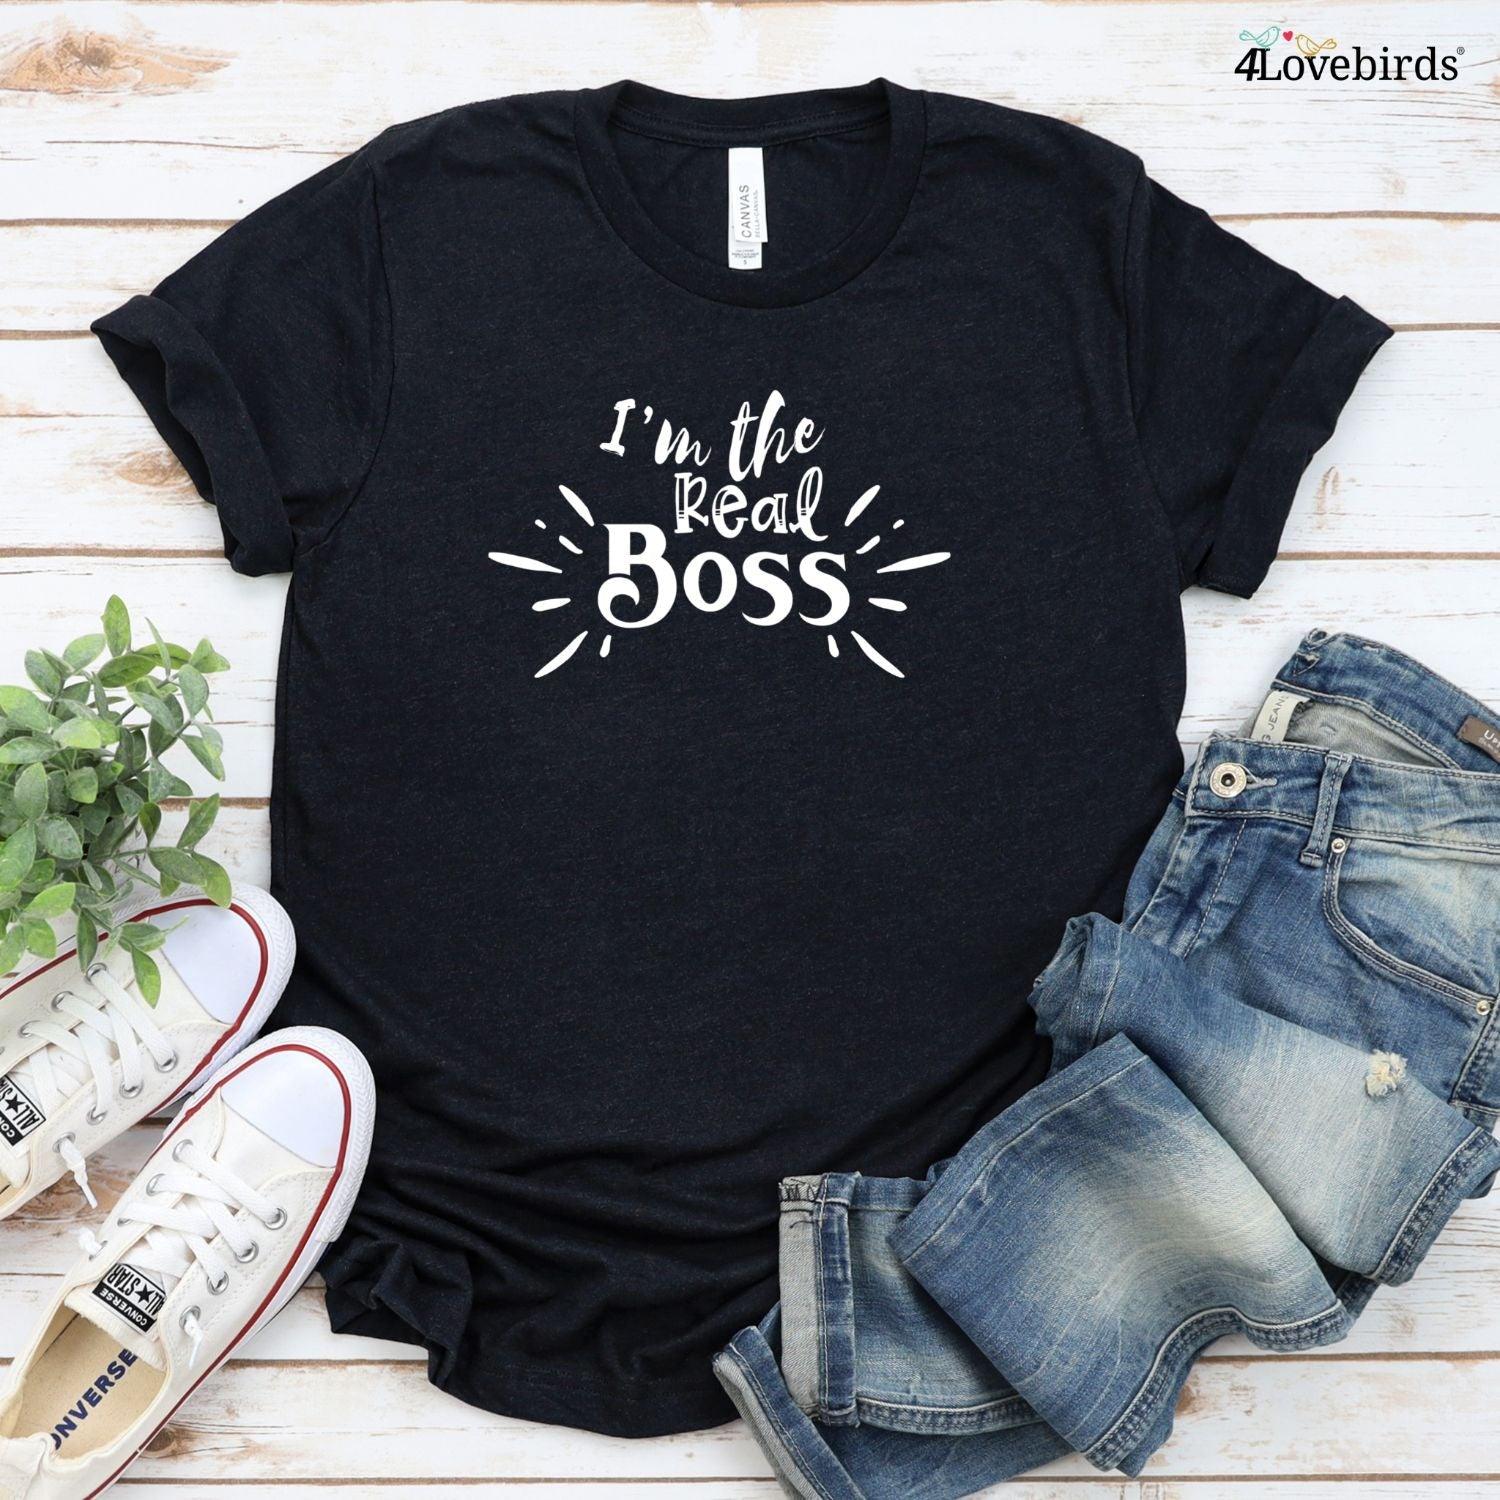 Matching Set: I'm The Boss/Real Boss Hoodie & T-shirt - Funny Couples Gift for Valentine's Day - 4Lovebirds